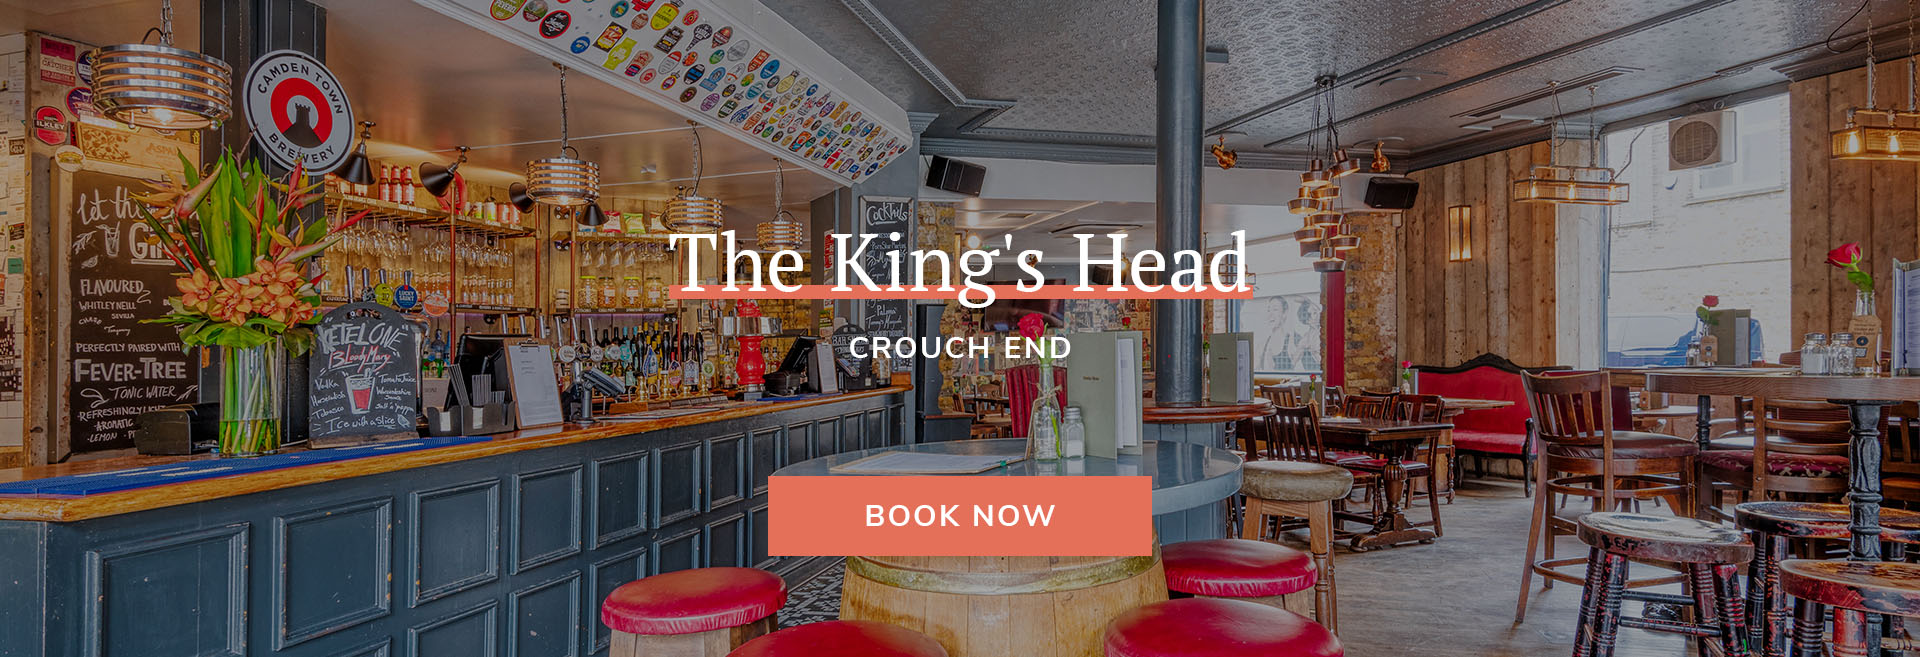 The King's Head Banner 2